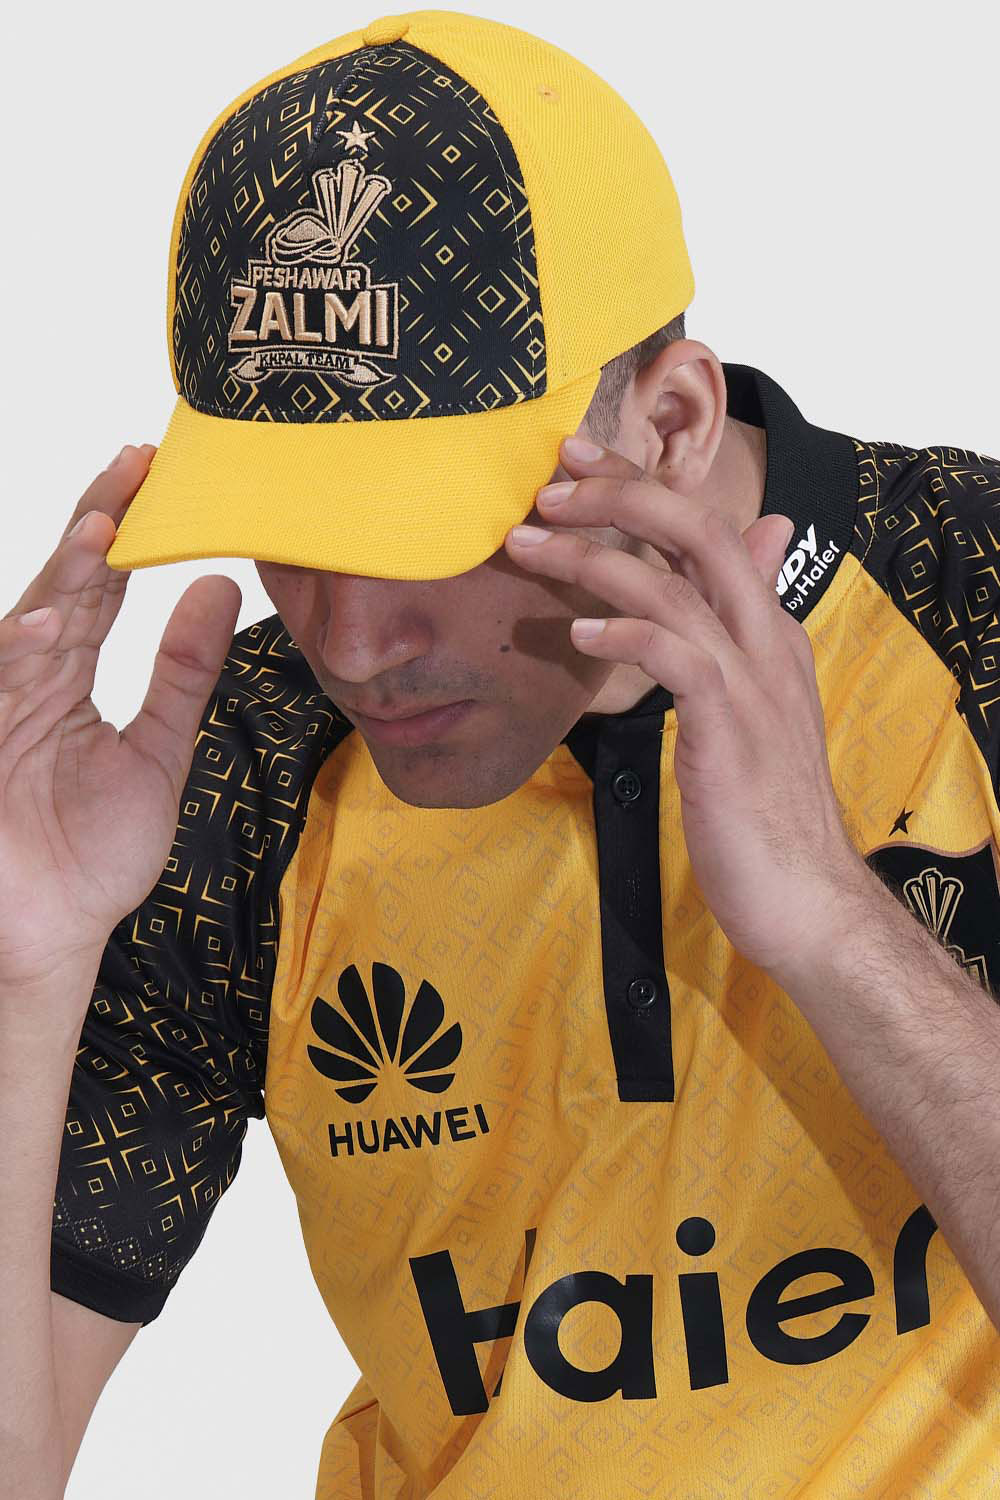 Zalmi Playing Cap - PSL 8 by Zalmi Store | Casual Outfit For Cricket